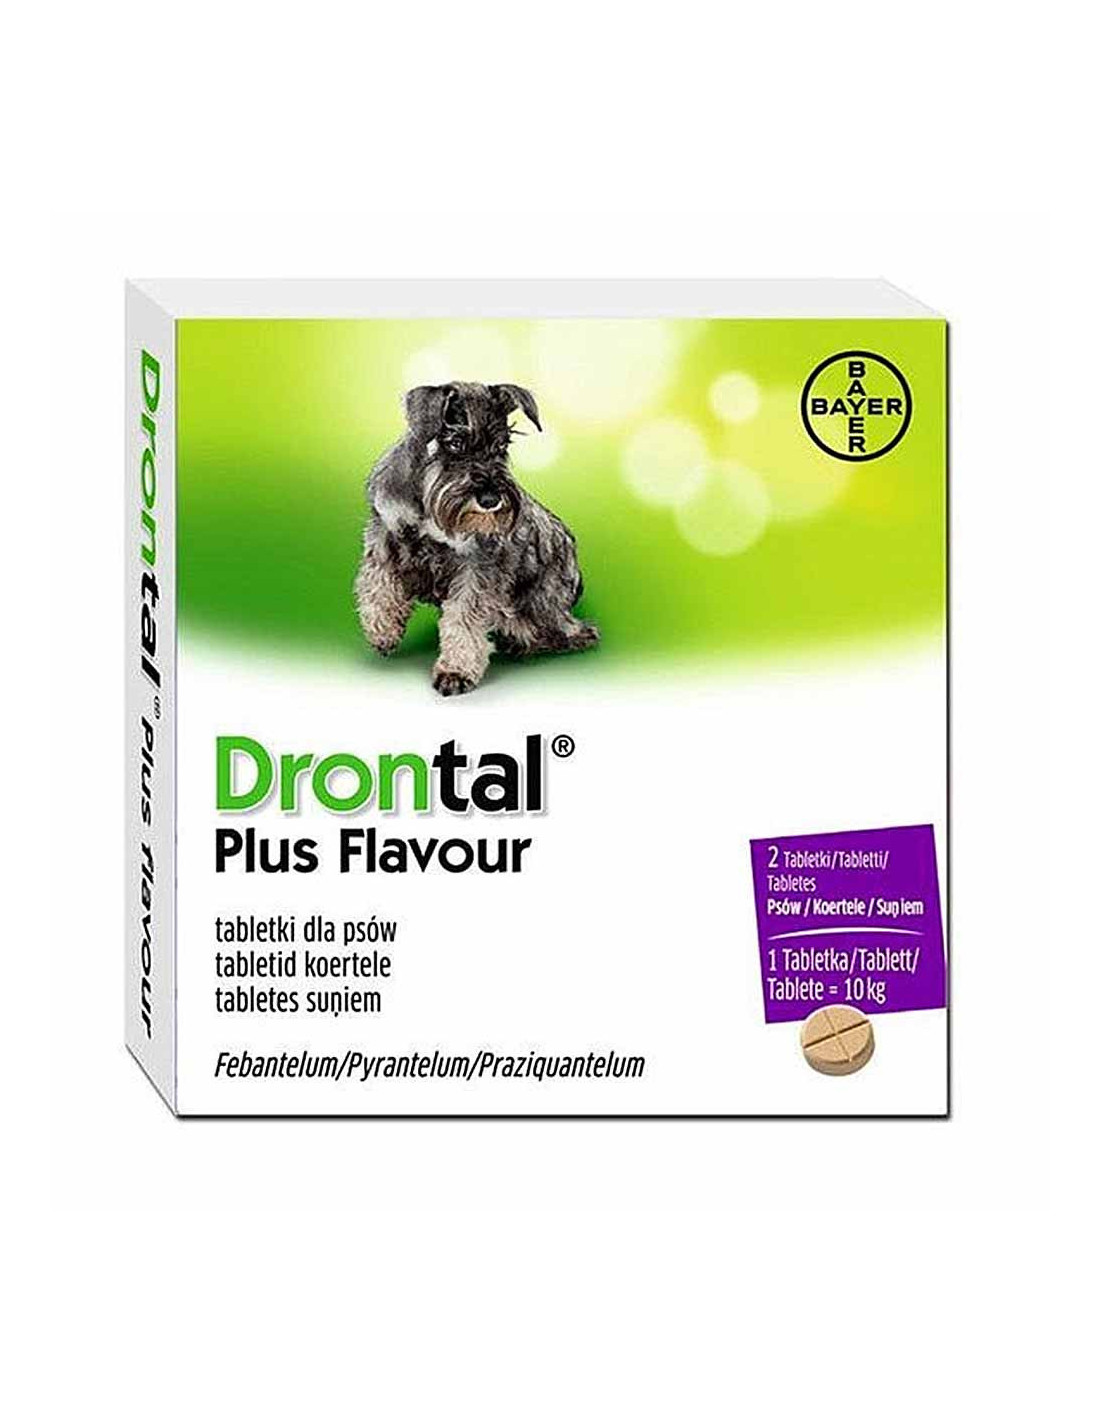 drontal plus for dogs